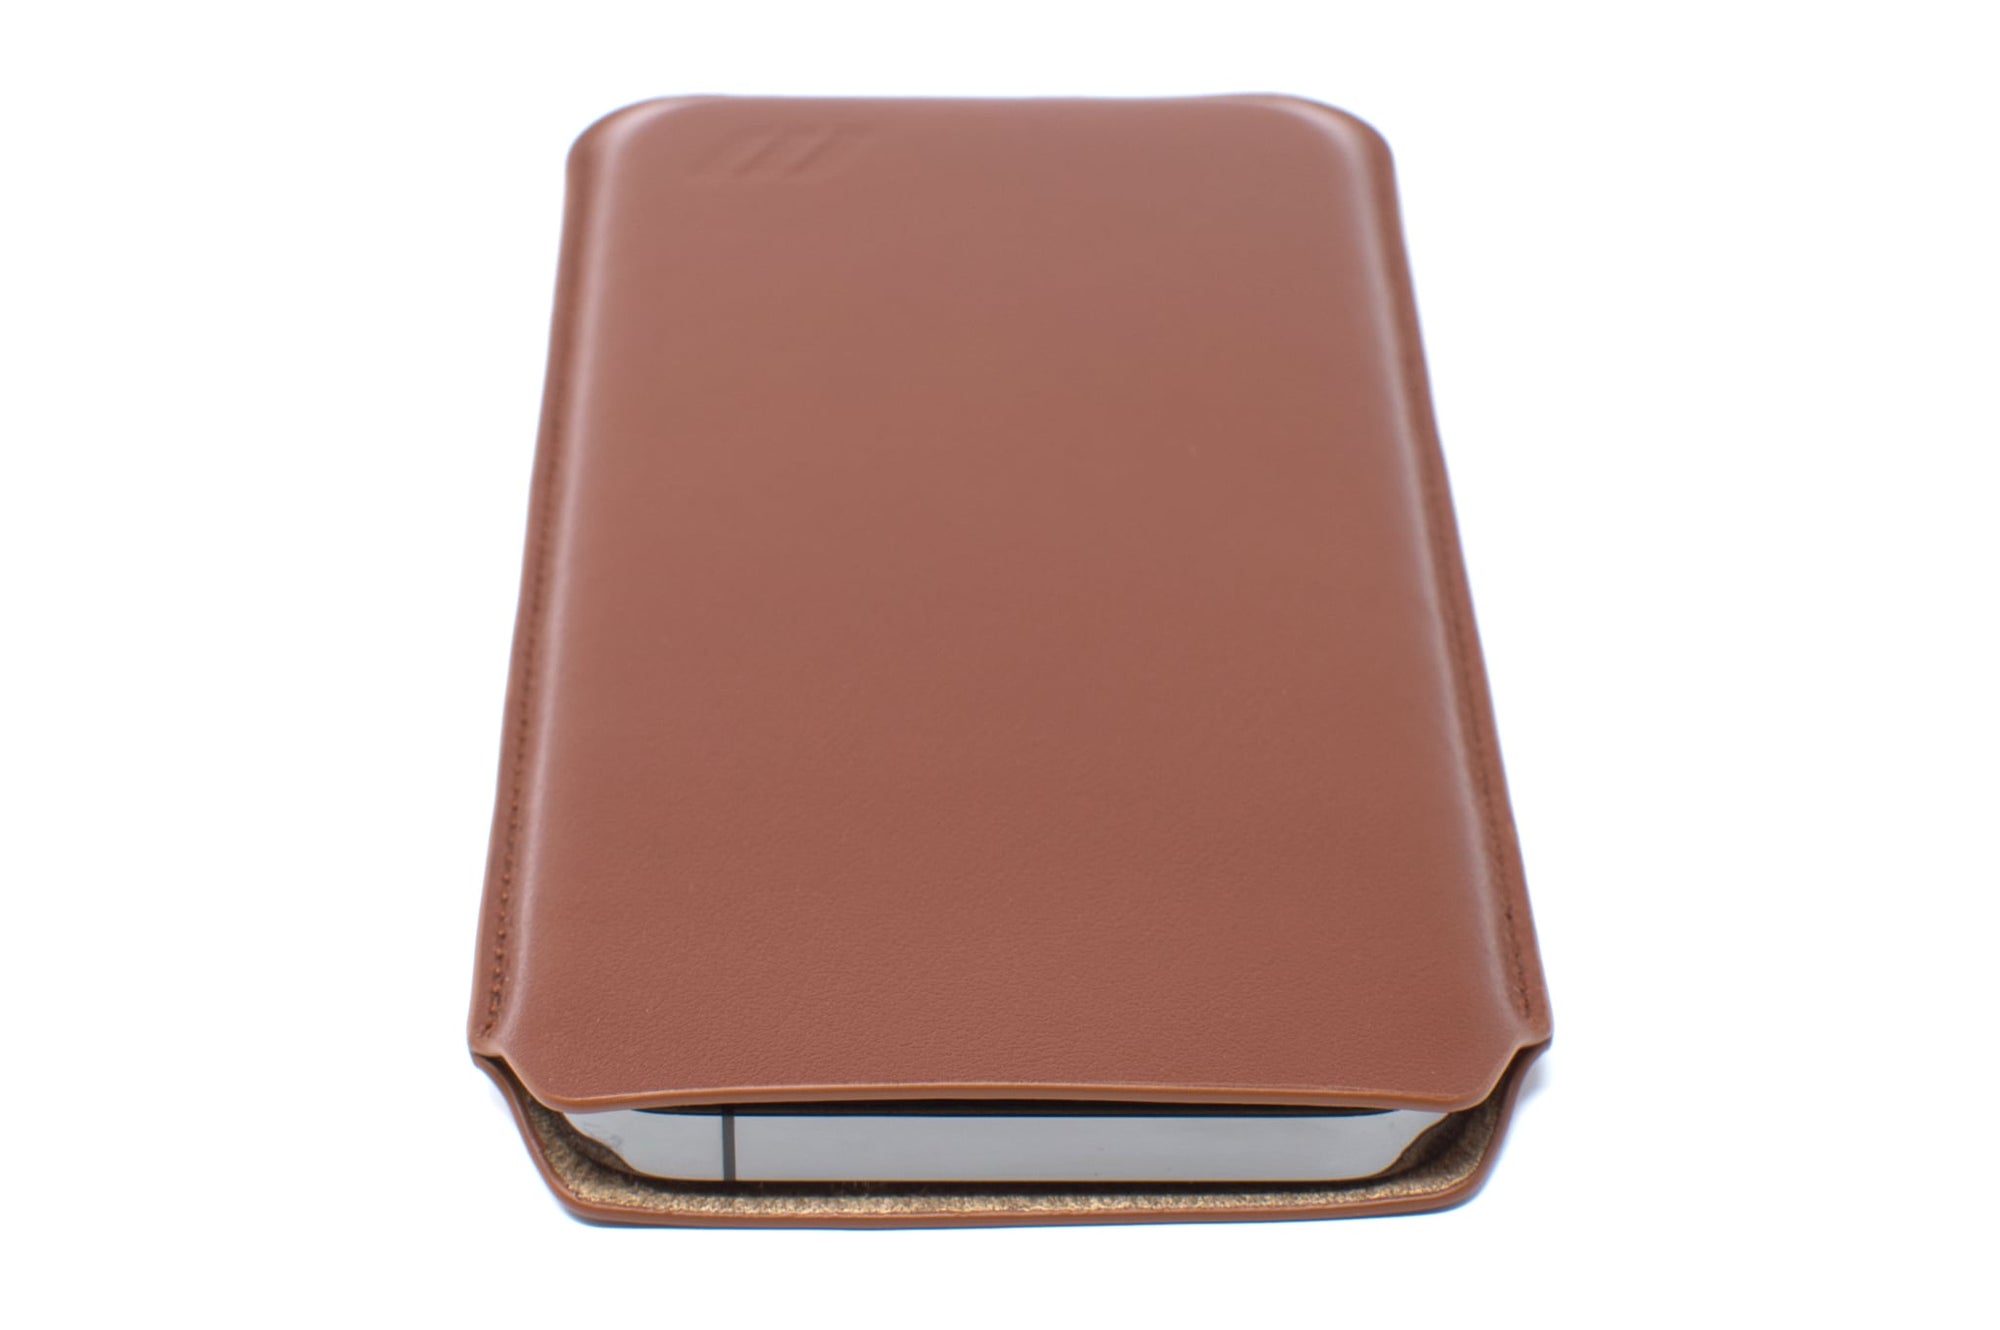 Apple iPhone 14 Pro Max Leather Sleeve Case - Skinny Fit - Acorn Brown